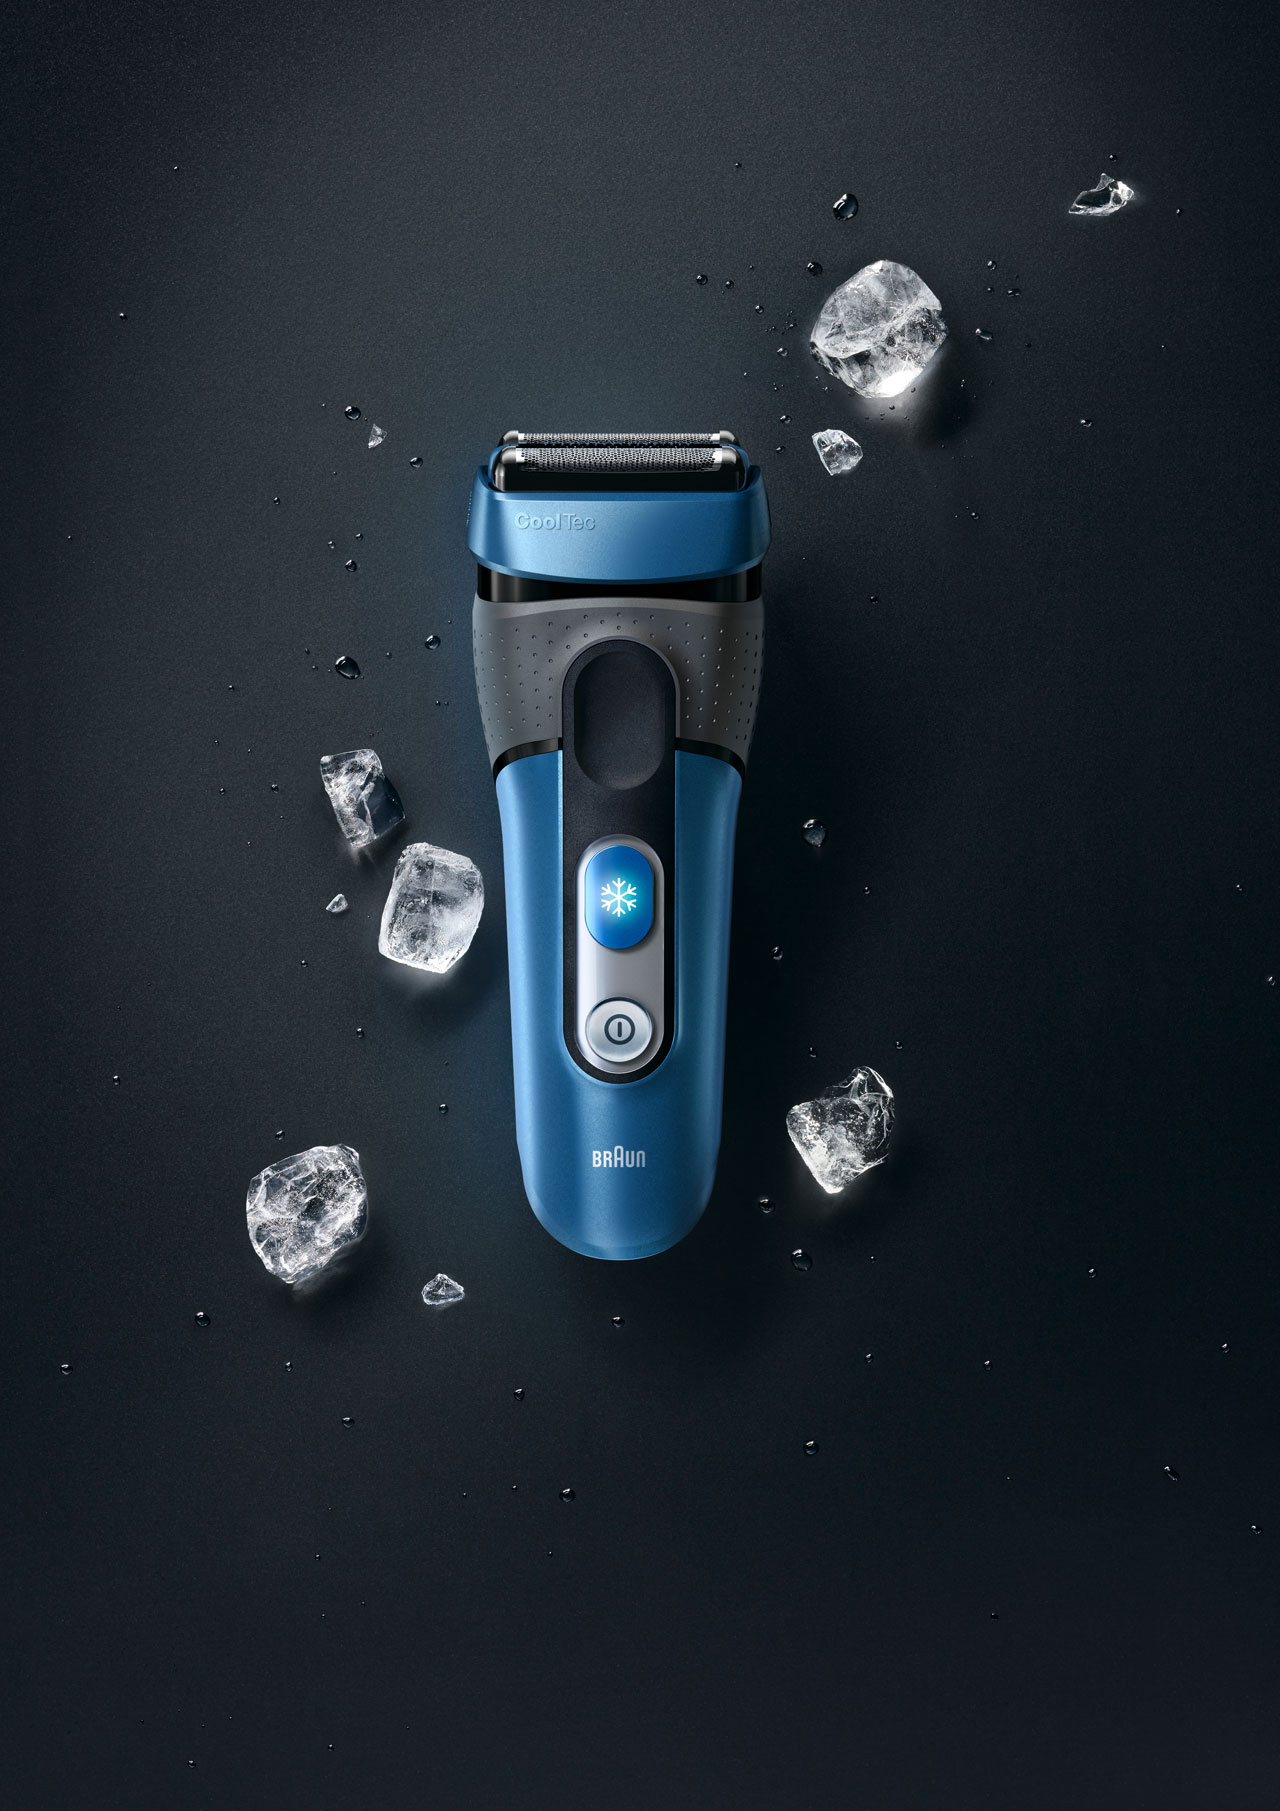 Black background with blue shaver and ice cubs around it